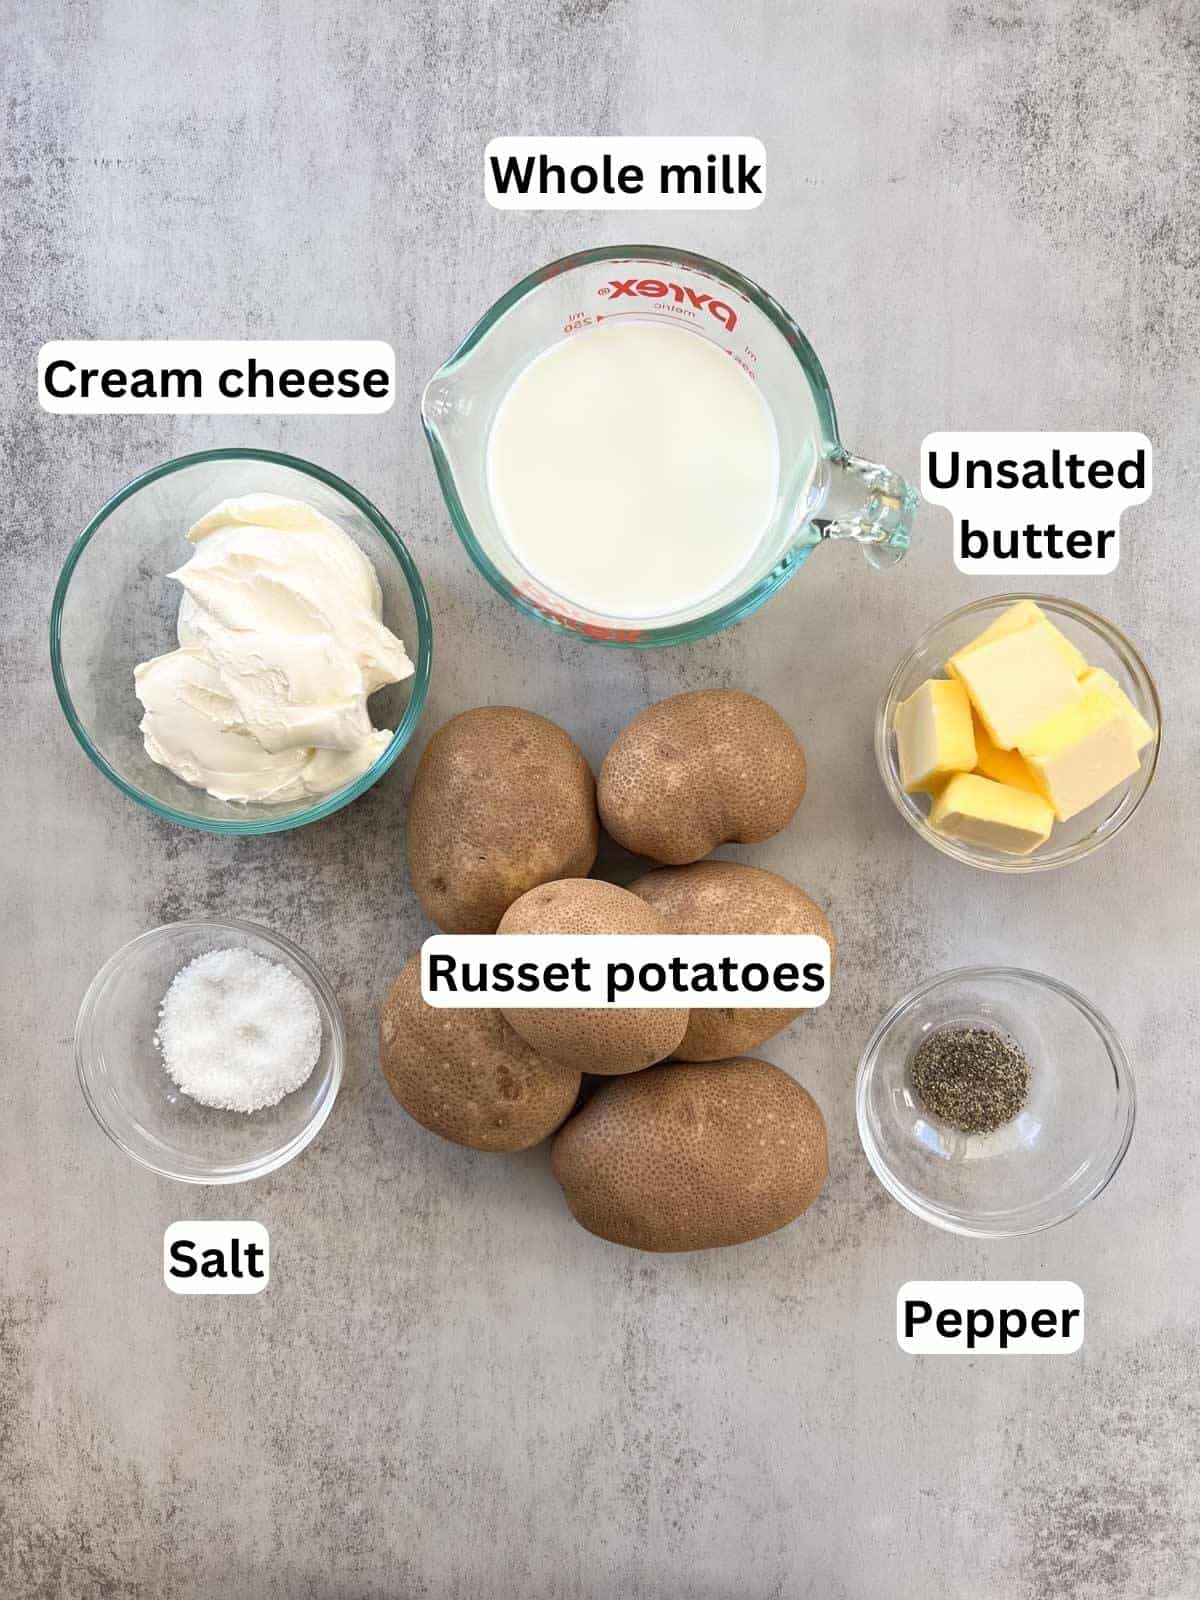 How To Make Mashed Potato in a Kitchenaid